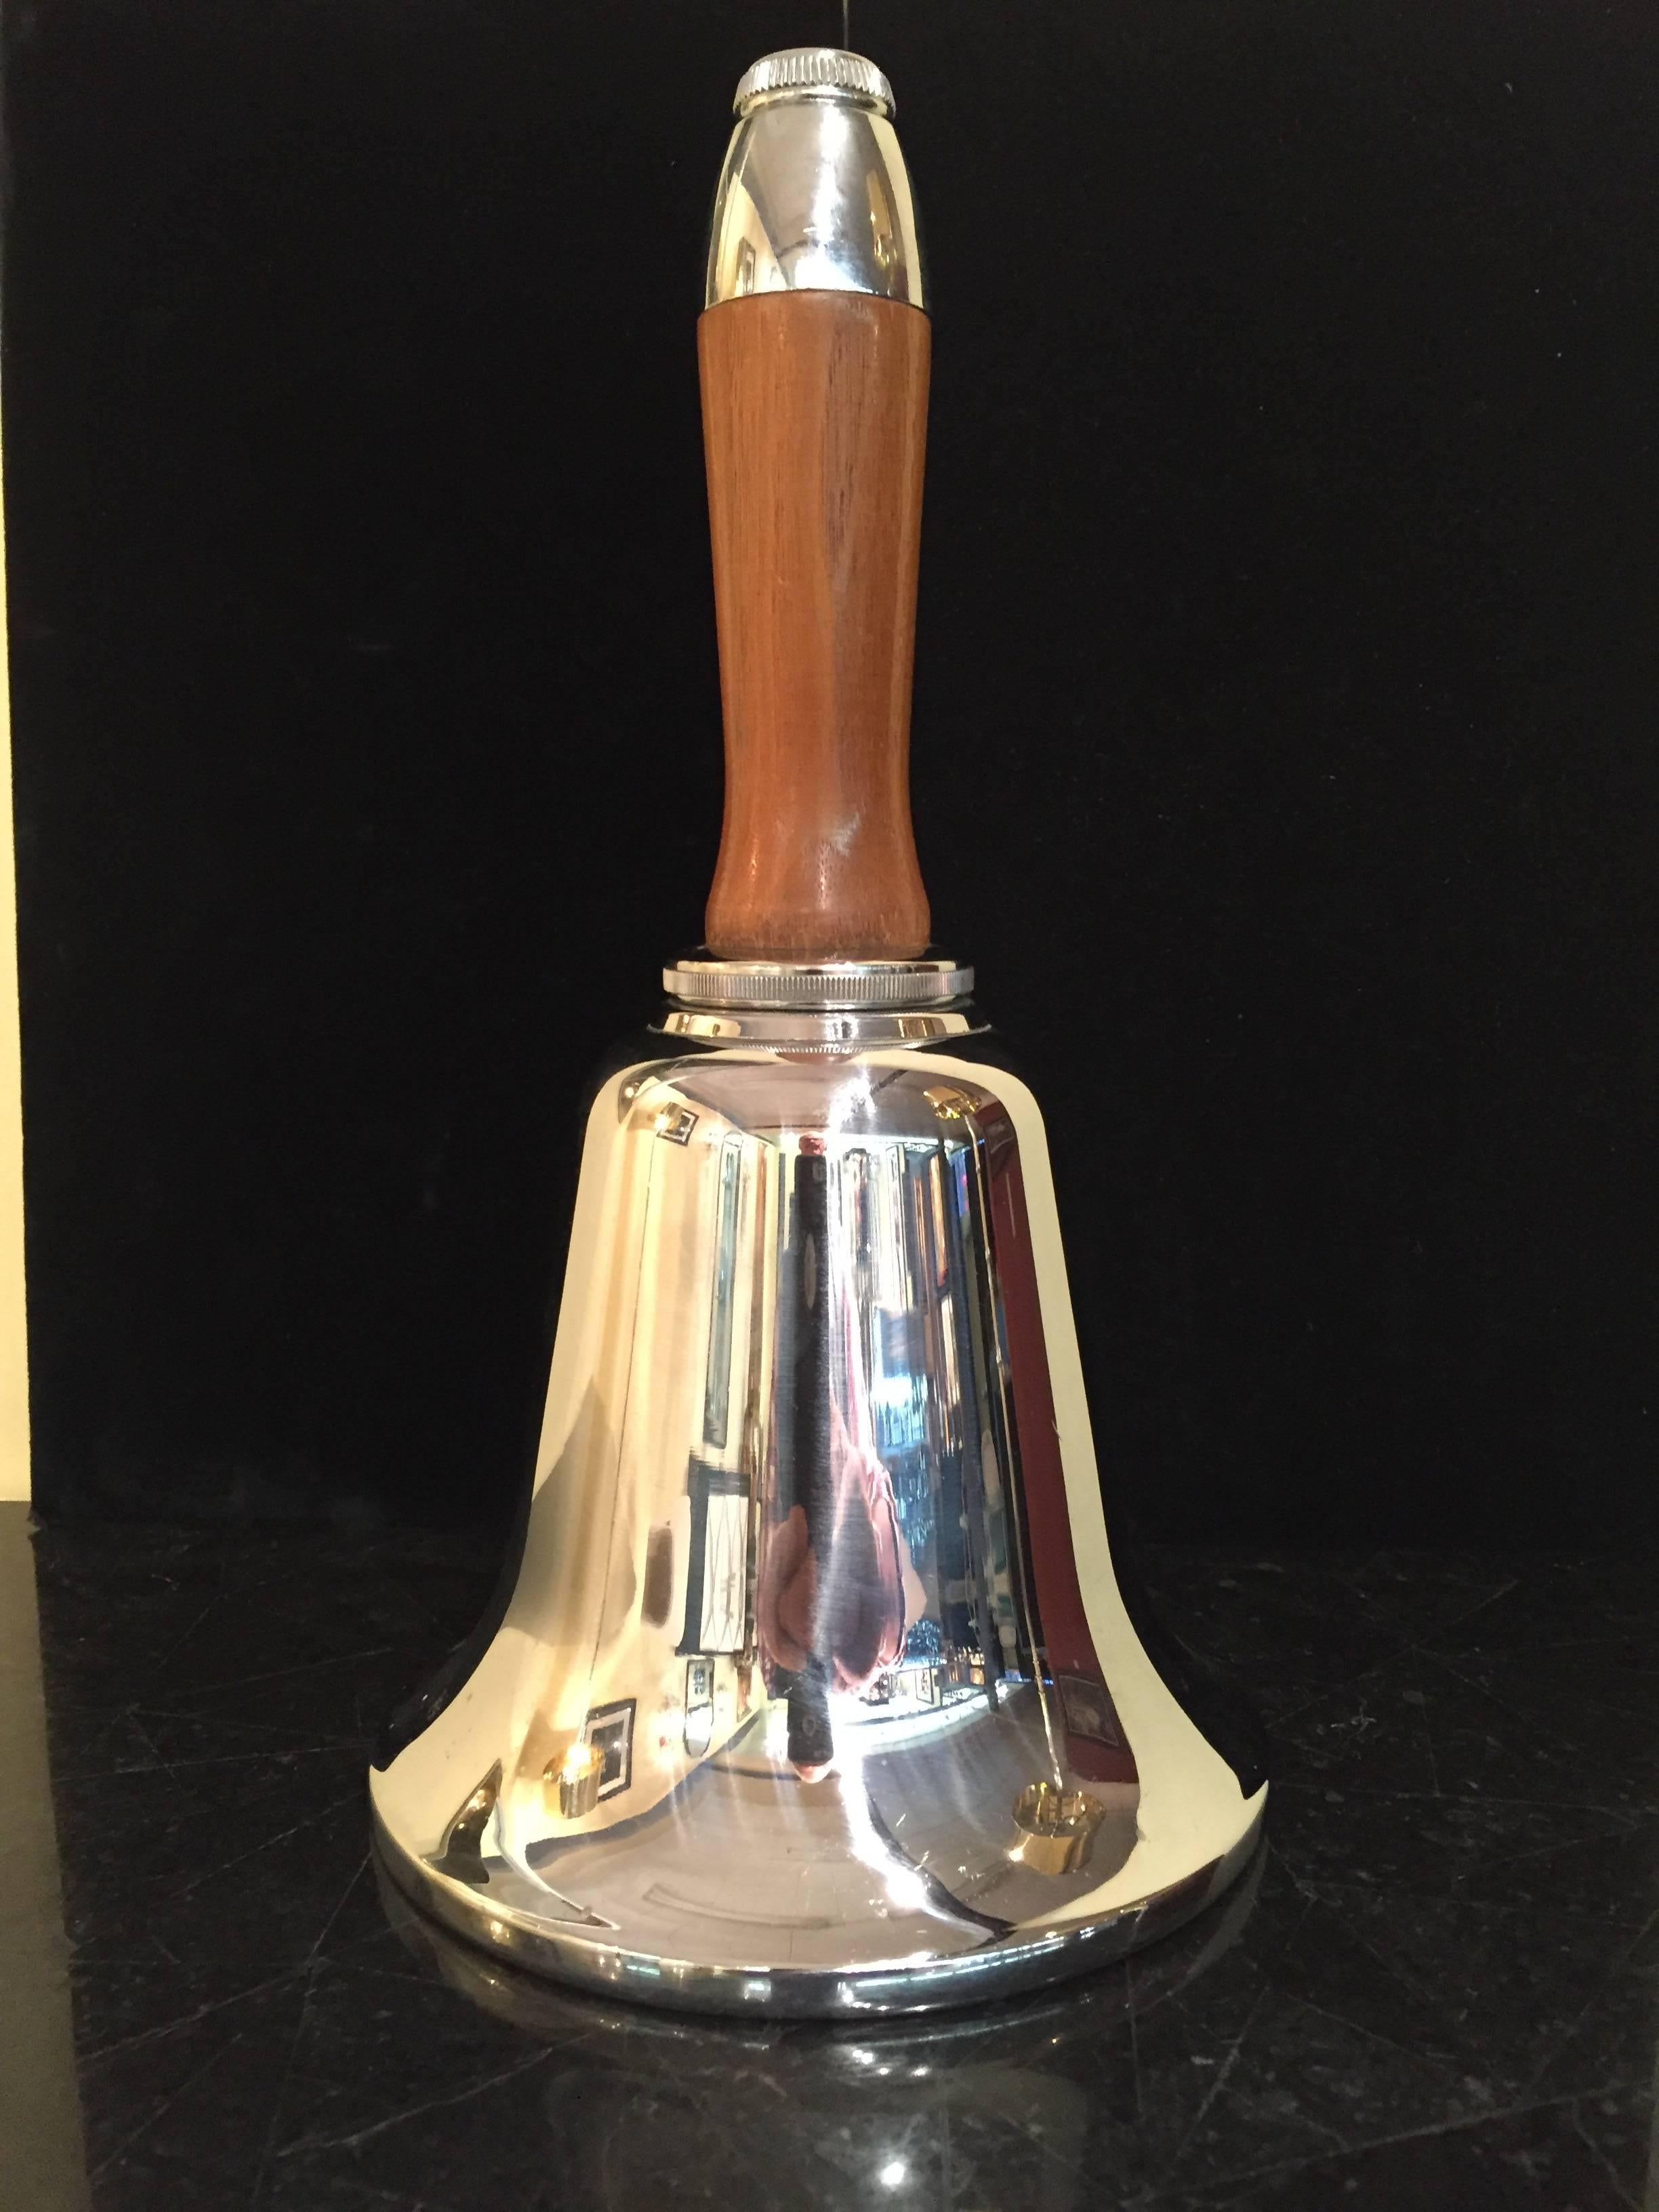 Art Deco large ringing bell martini shaker, with wood handle screw top for straining, with active metal ringing bell interior. Stamped Chrome on base.